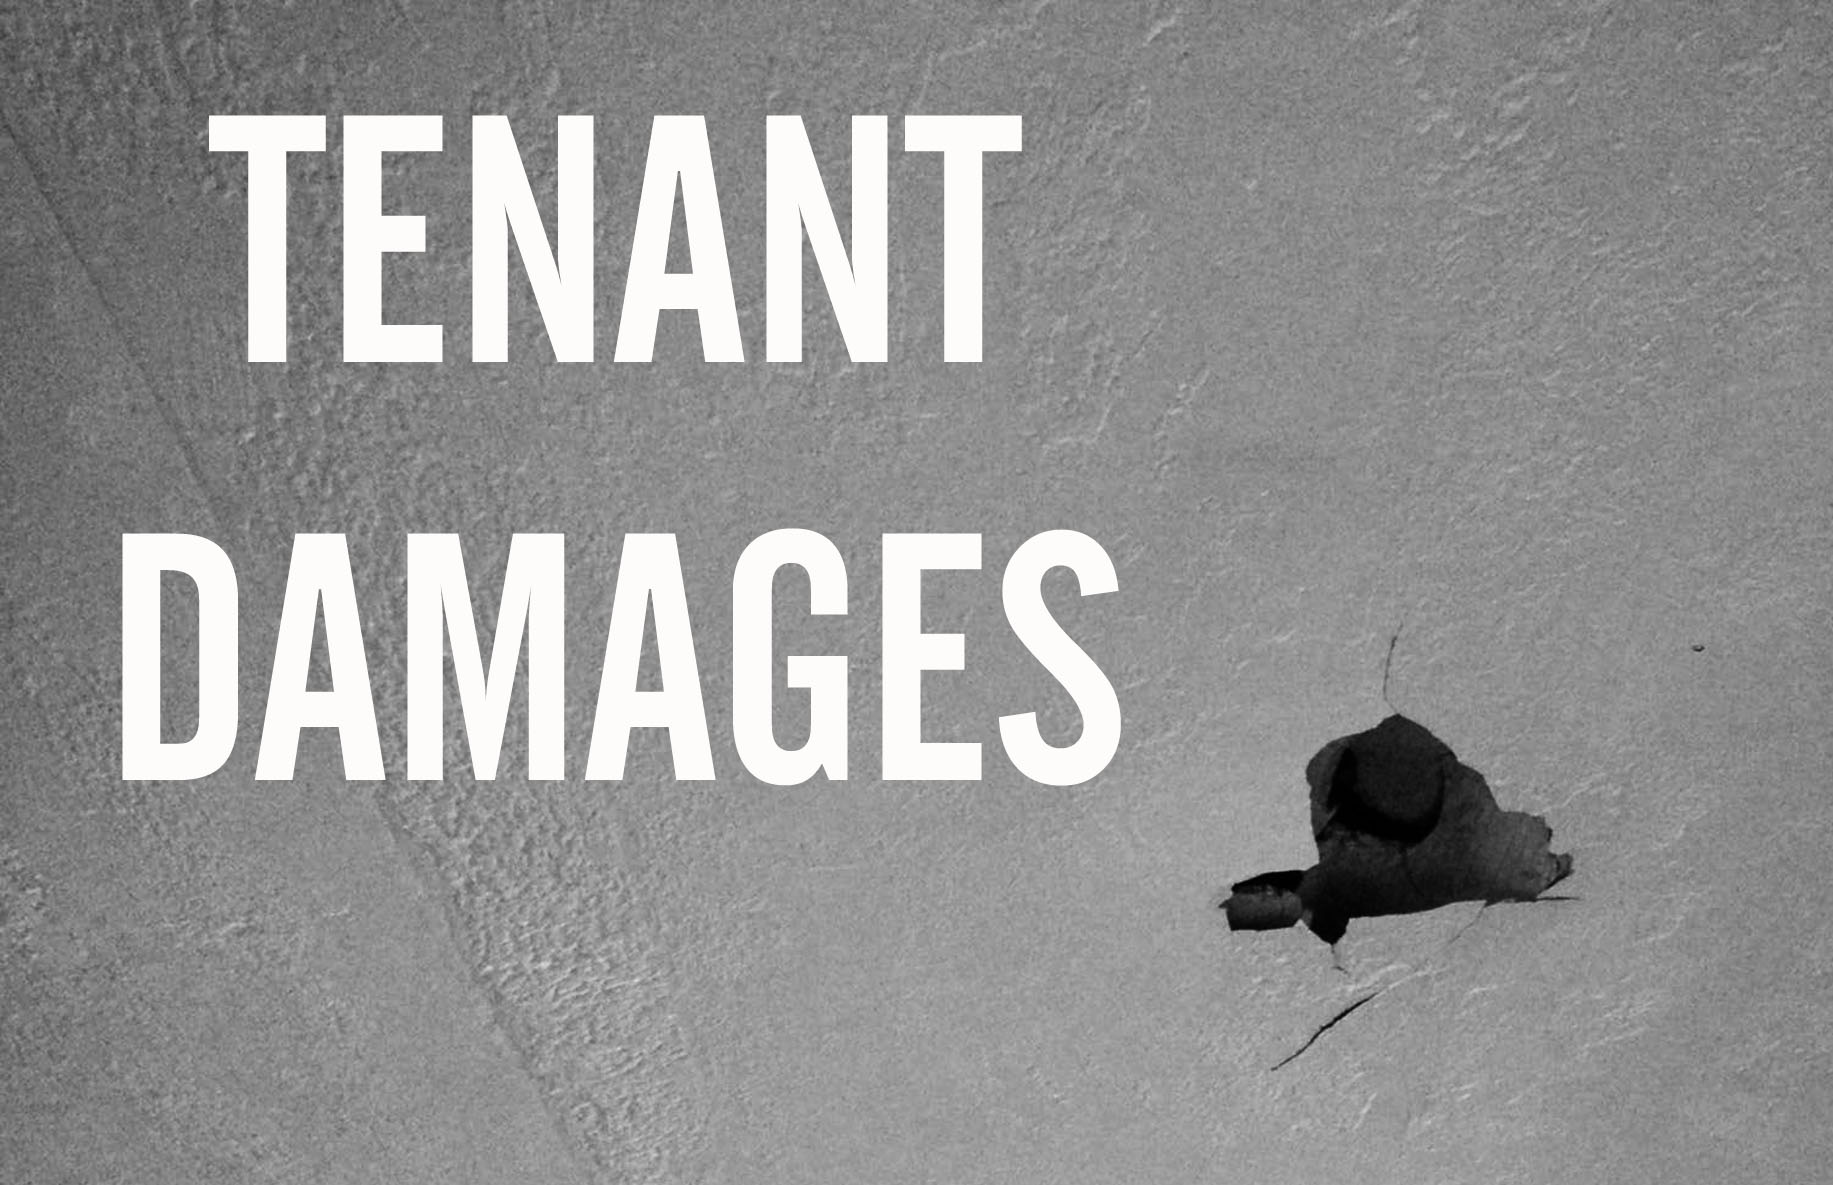 TENANT DAMAGES: Serving Justice to the Damage-Prone